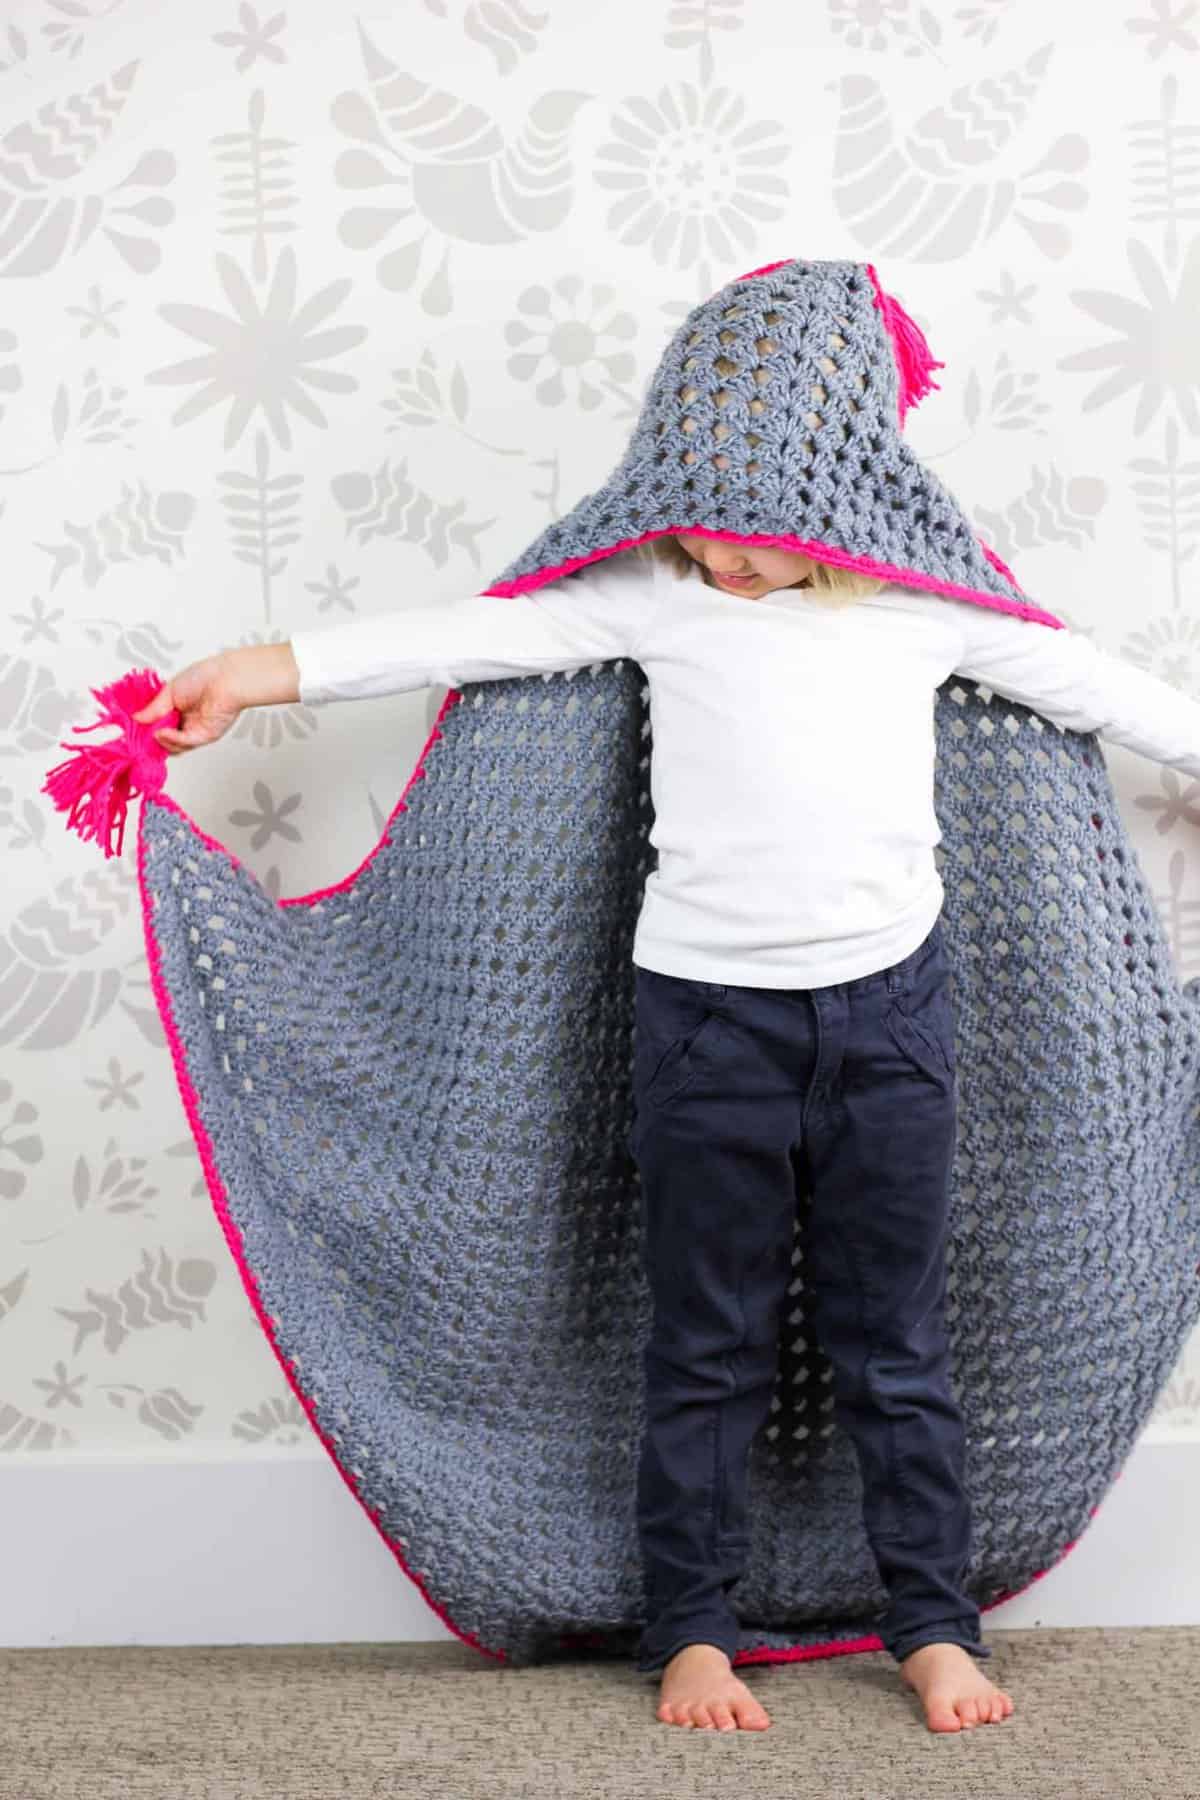 Based on a large granny square, the "Granny Gives Back" crochet hooded blanket pattern makes an easy and inexpensive project to donate to children's charities. The oversized hood and playful tassels will give any kid a safe, warm place to escape to. Click for the free pattern using Lion Brand Pound of Love yarn!